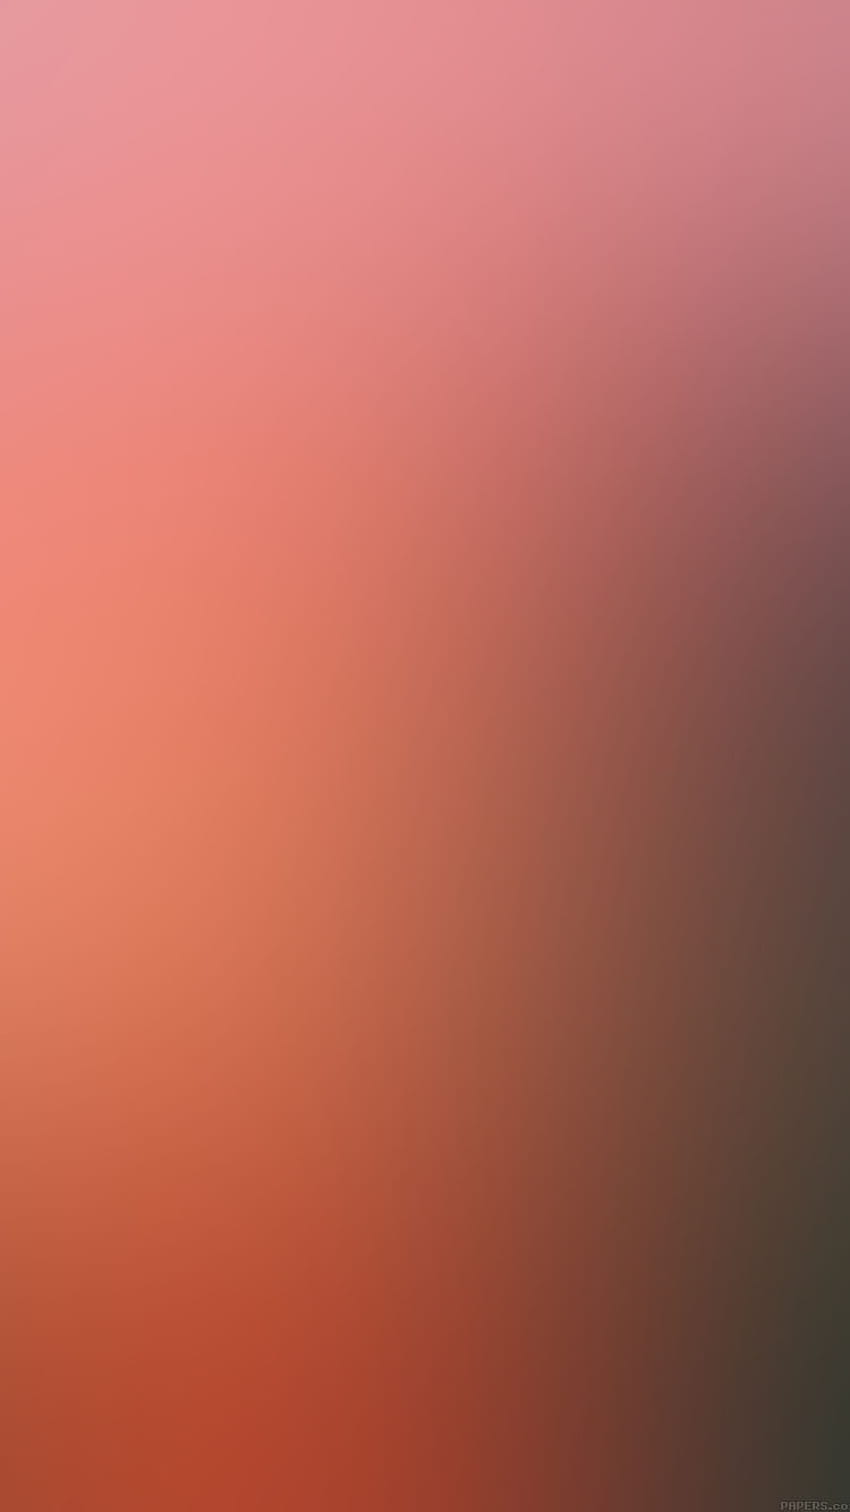 A blurry image of an orange and pink sky - Salmon